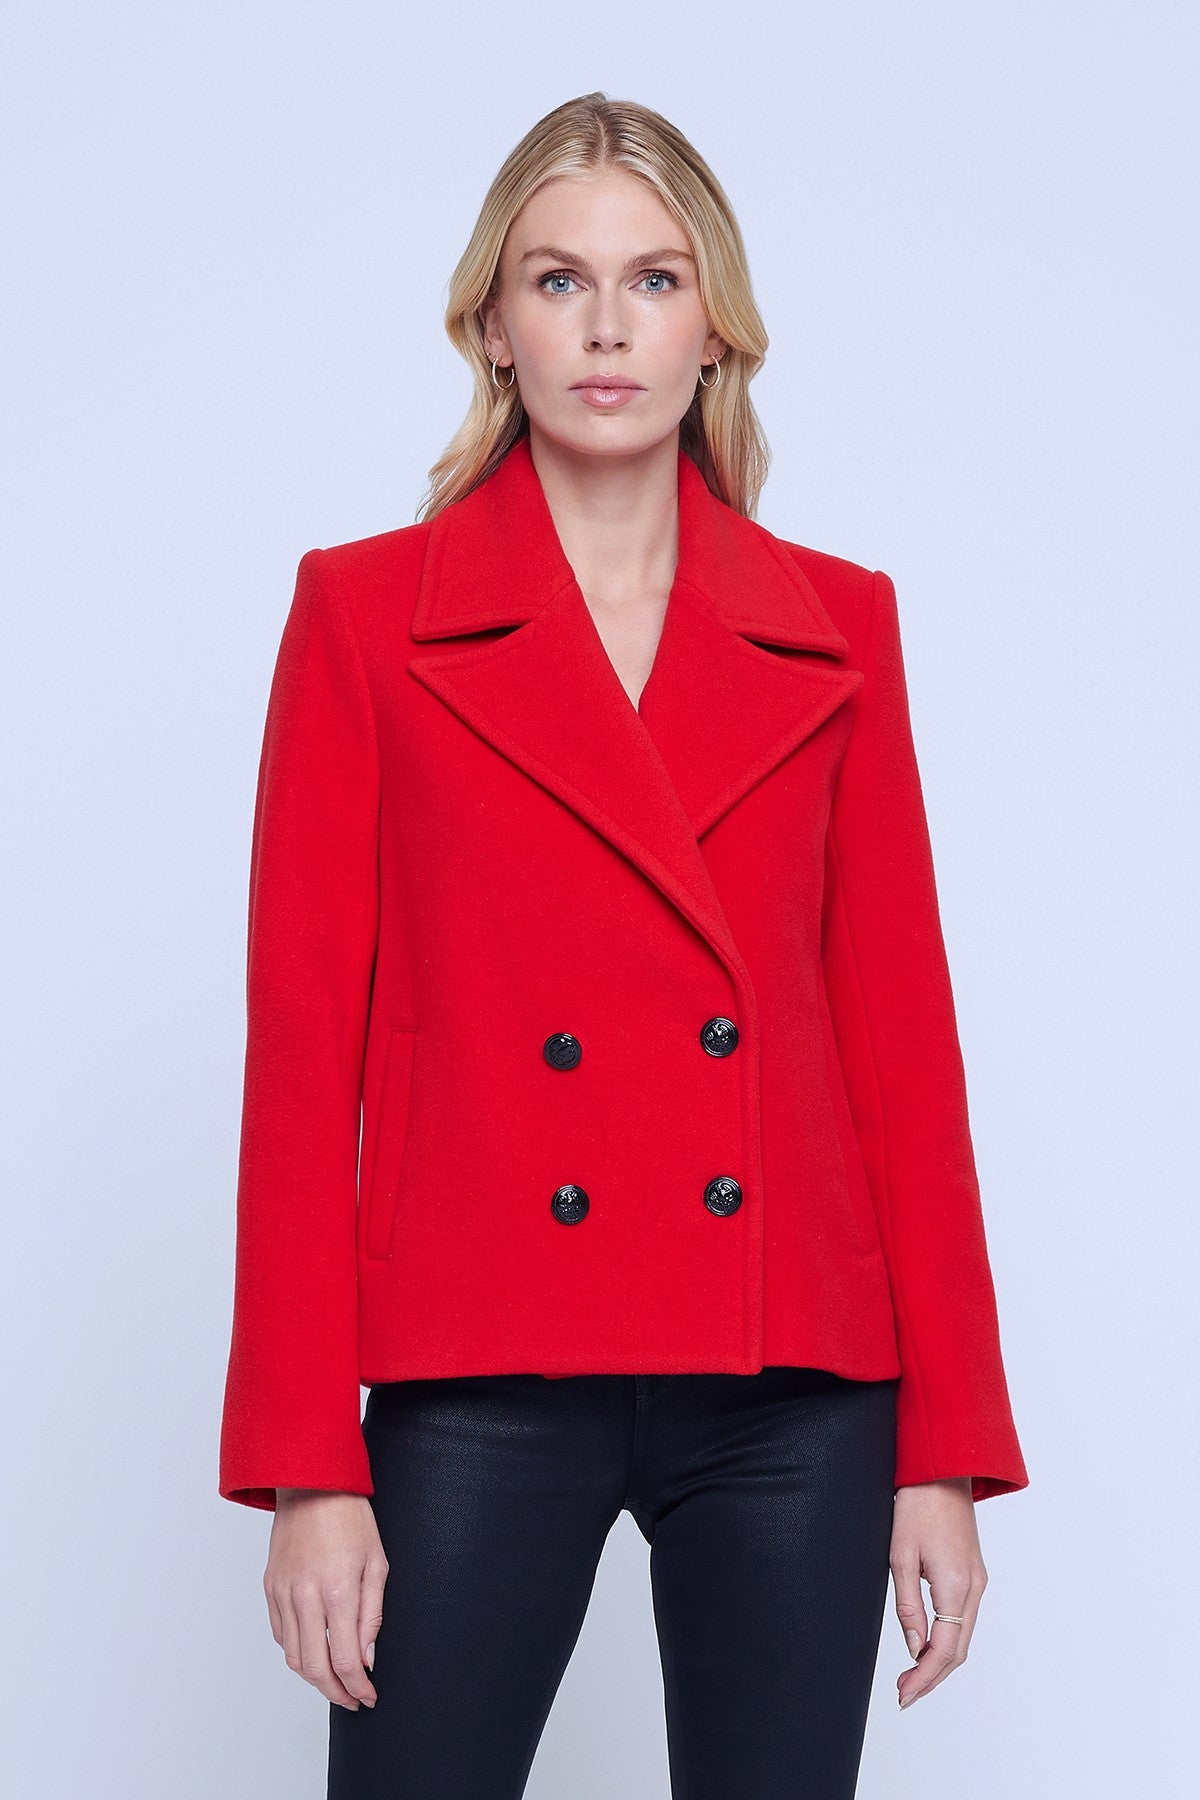 L'Agence Athens Cropped Peacoat